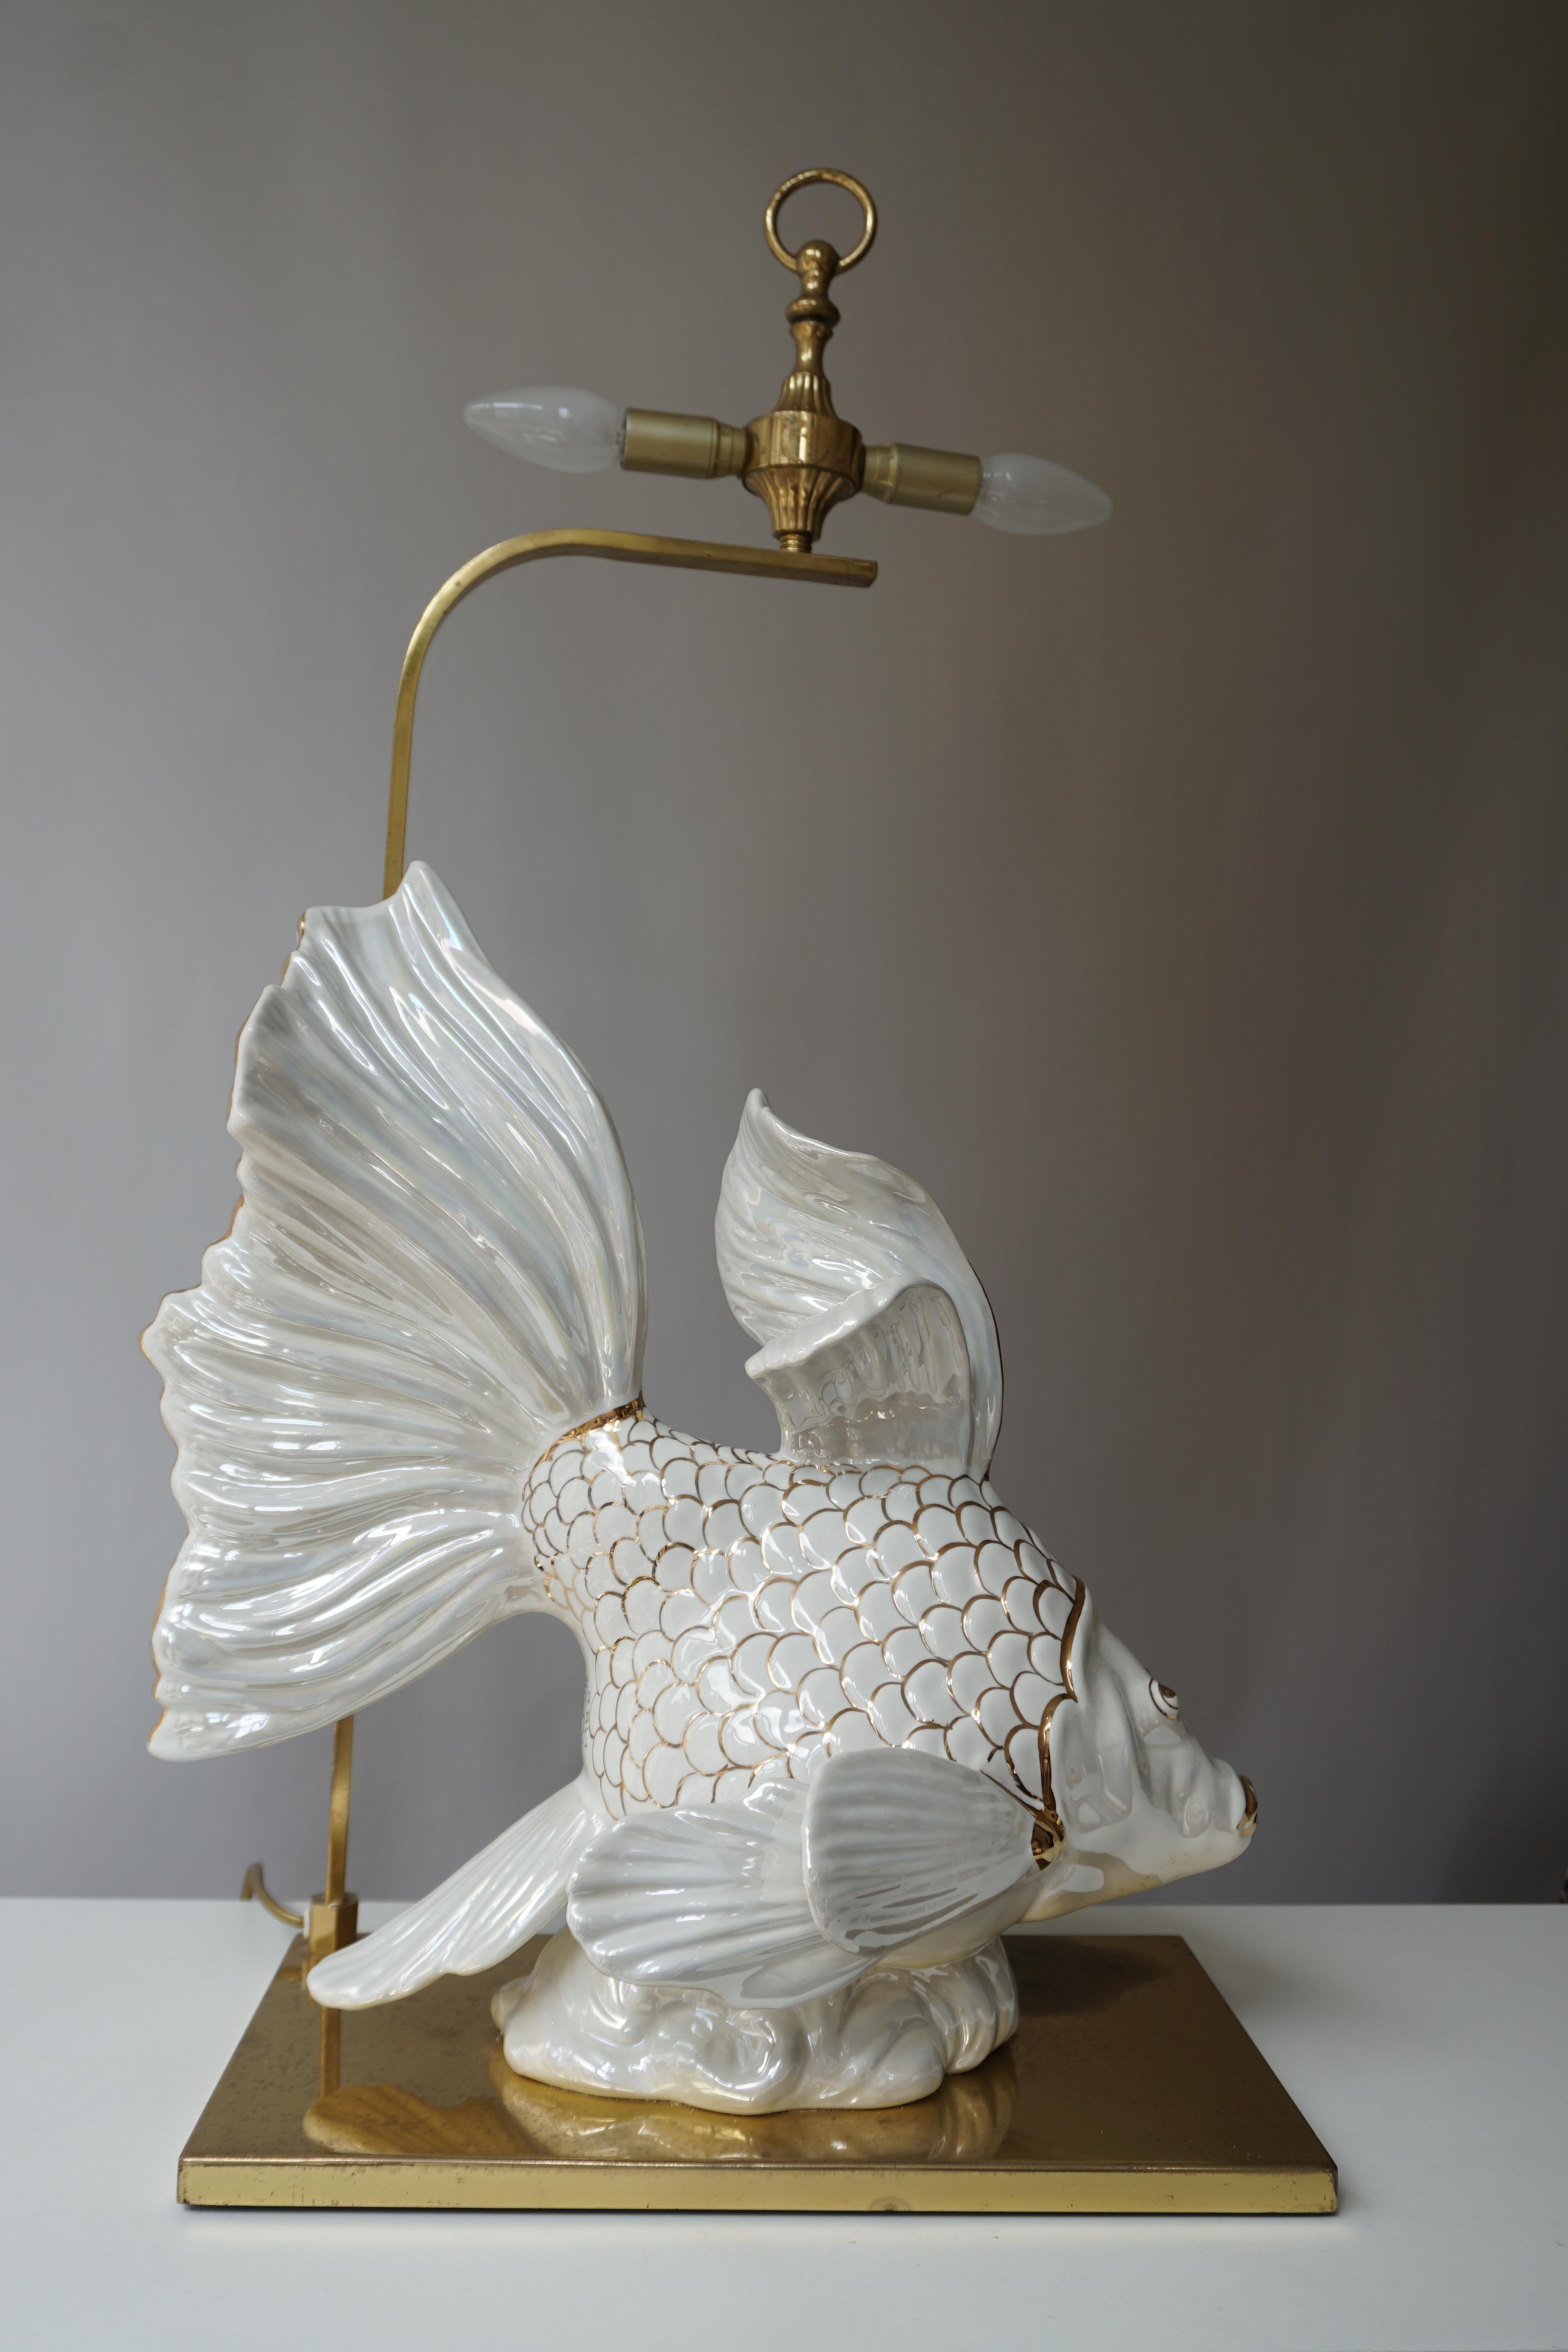 Mid-Century Modern Italian Midcentury Big Ceramic Fish Lamp with Brass Details, 1970s For Sale